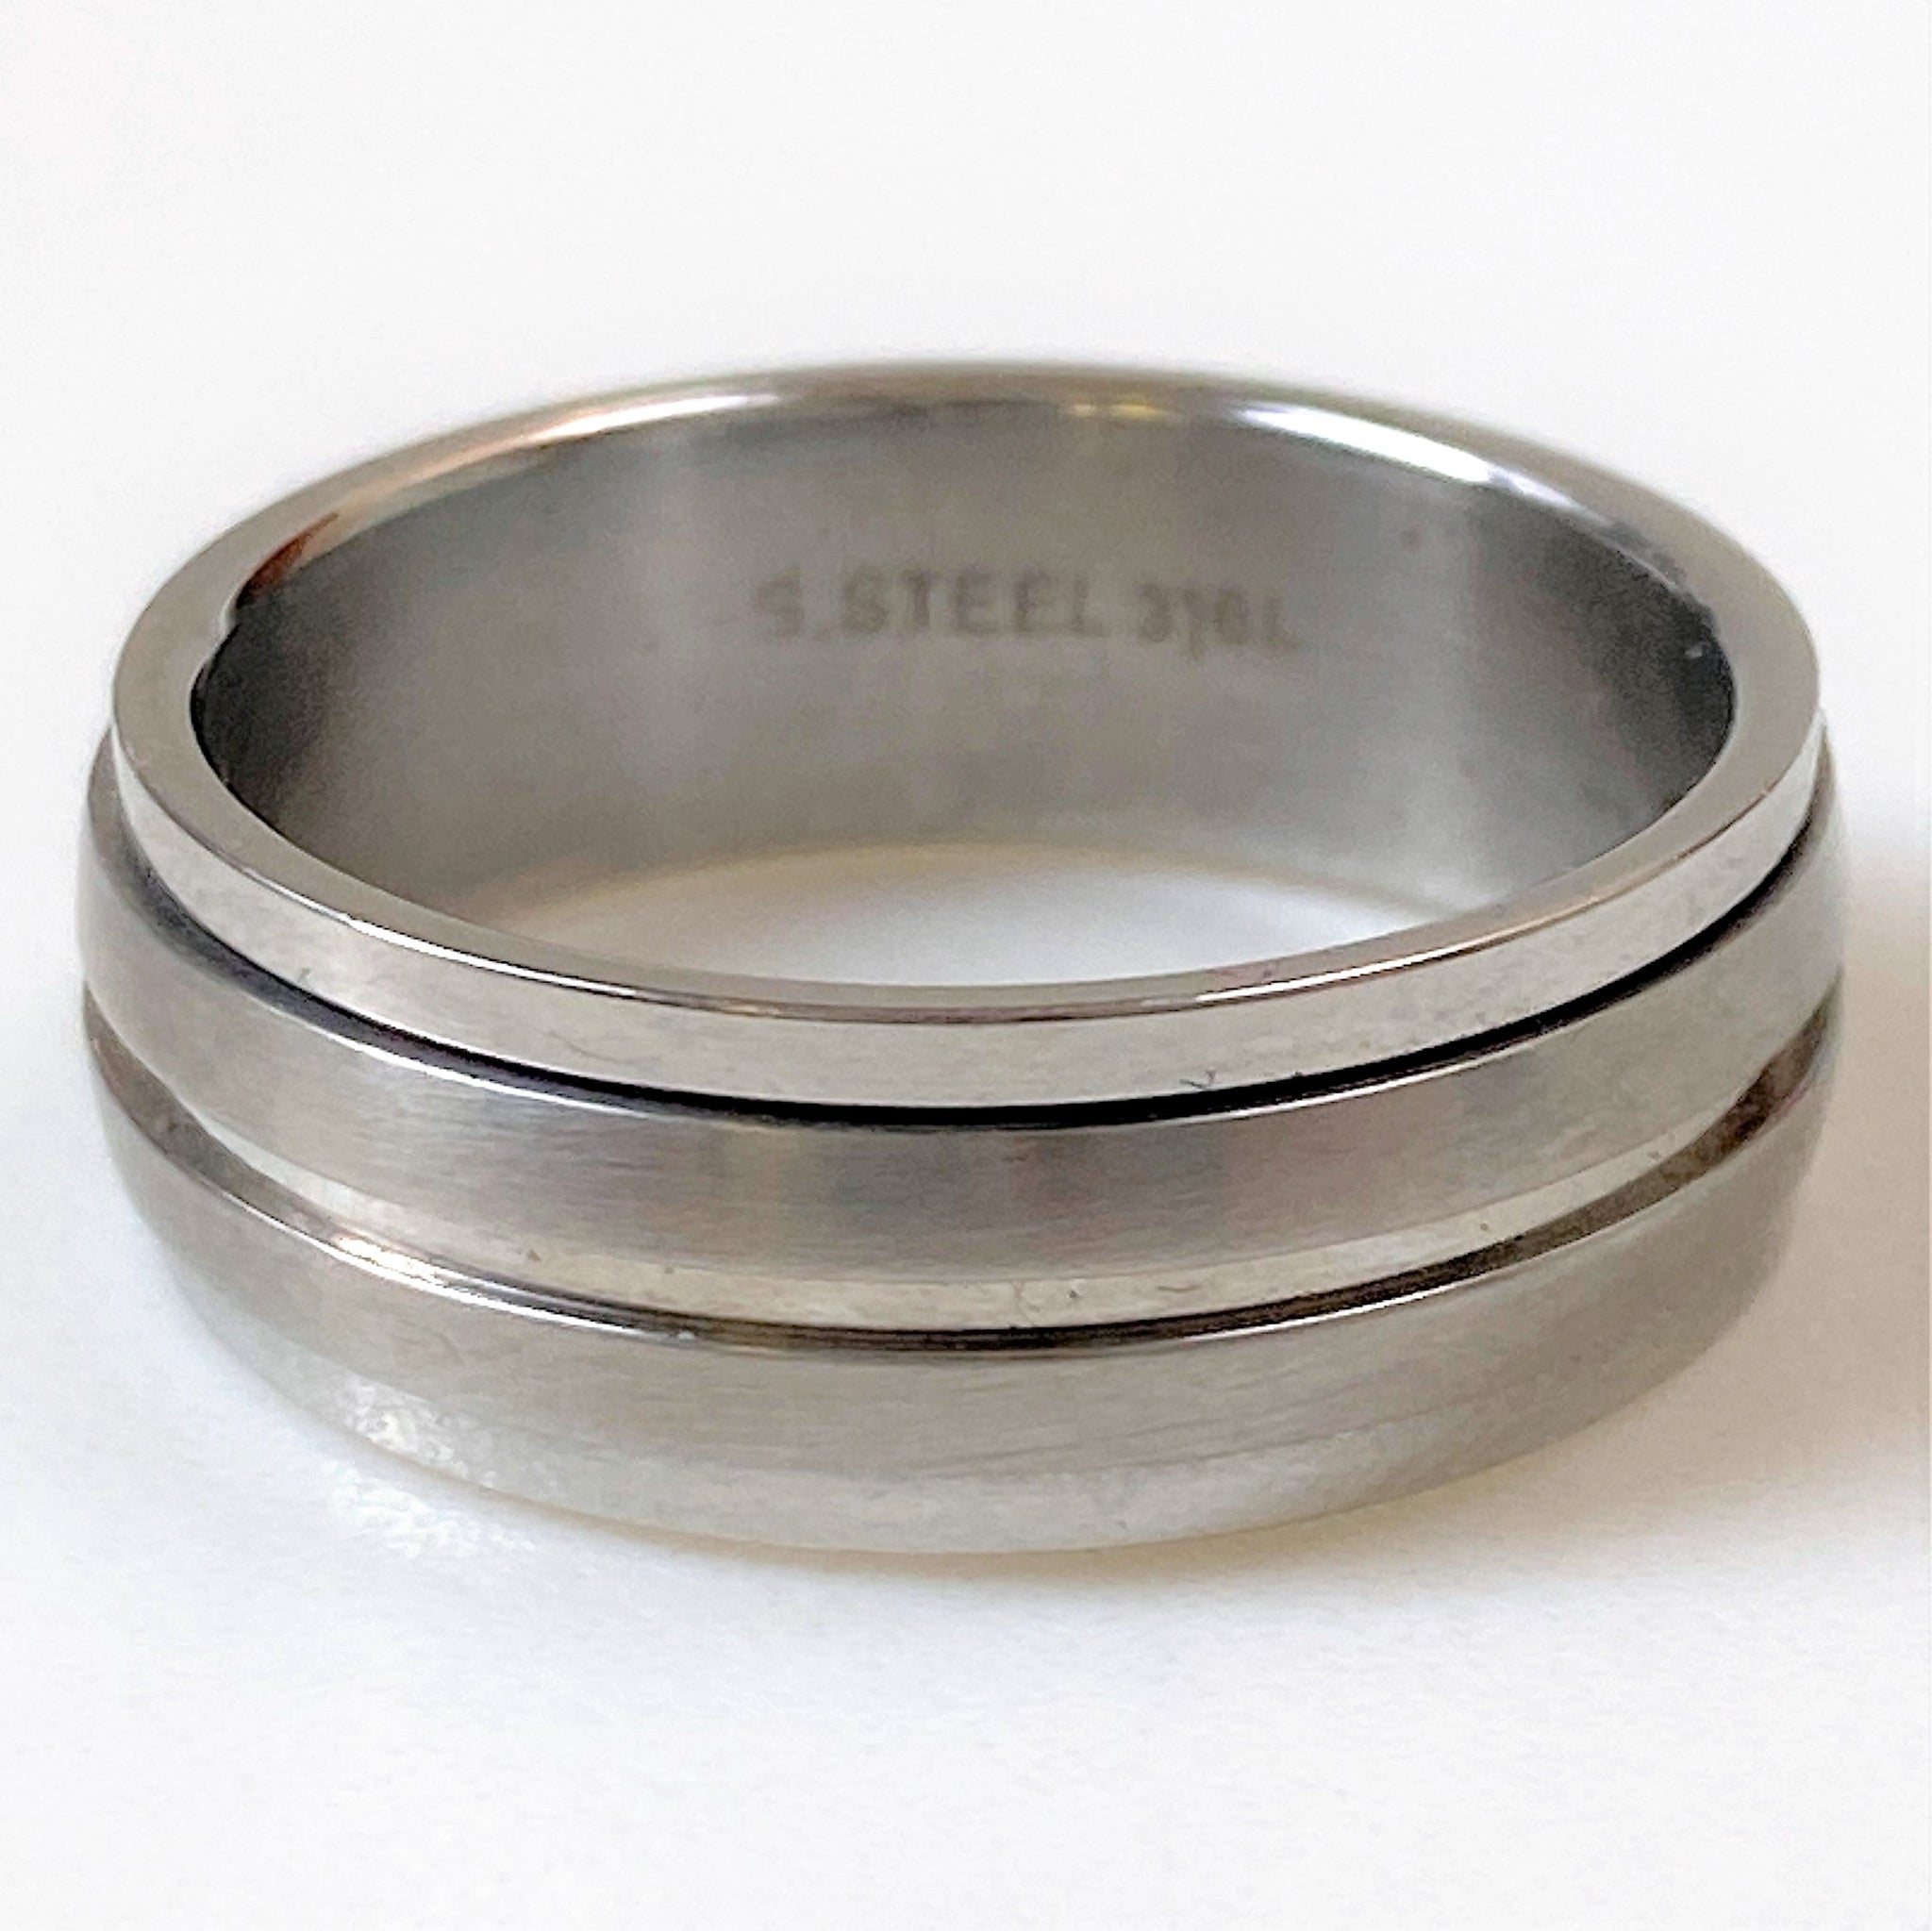 Stainless Steel Men’s Ring with Rotating Elements